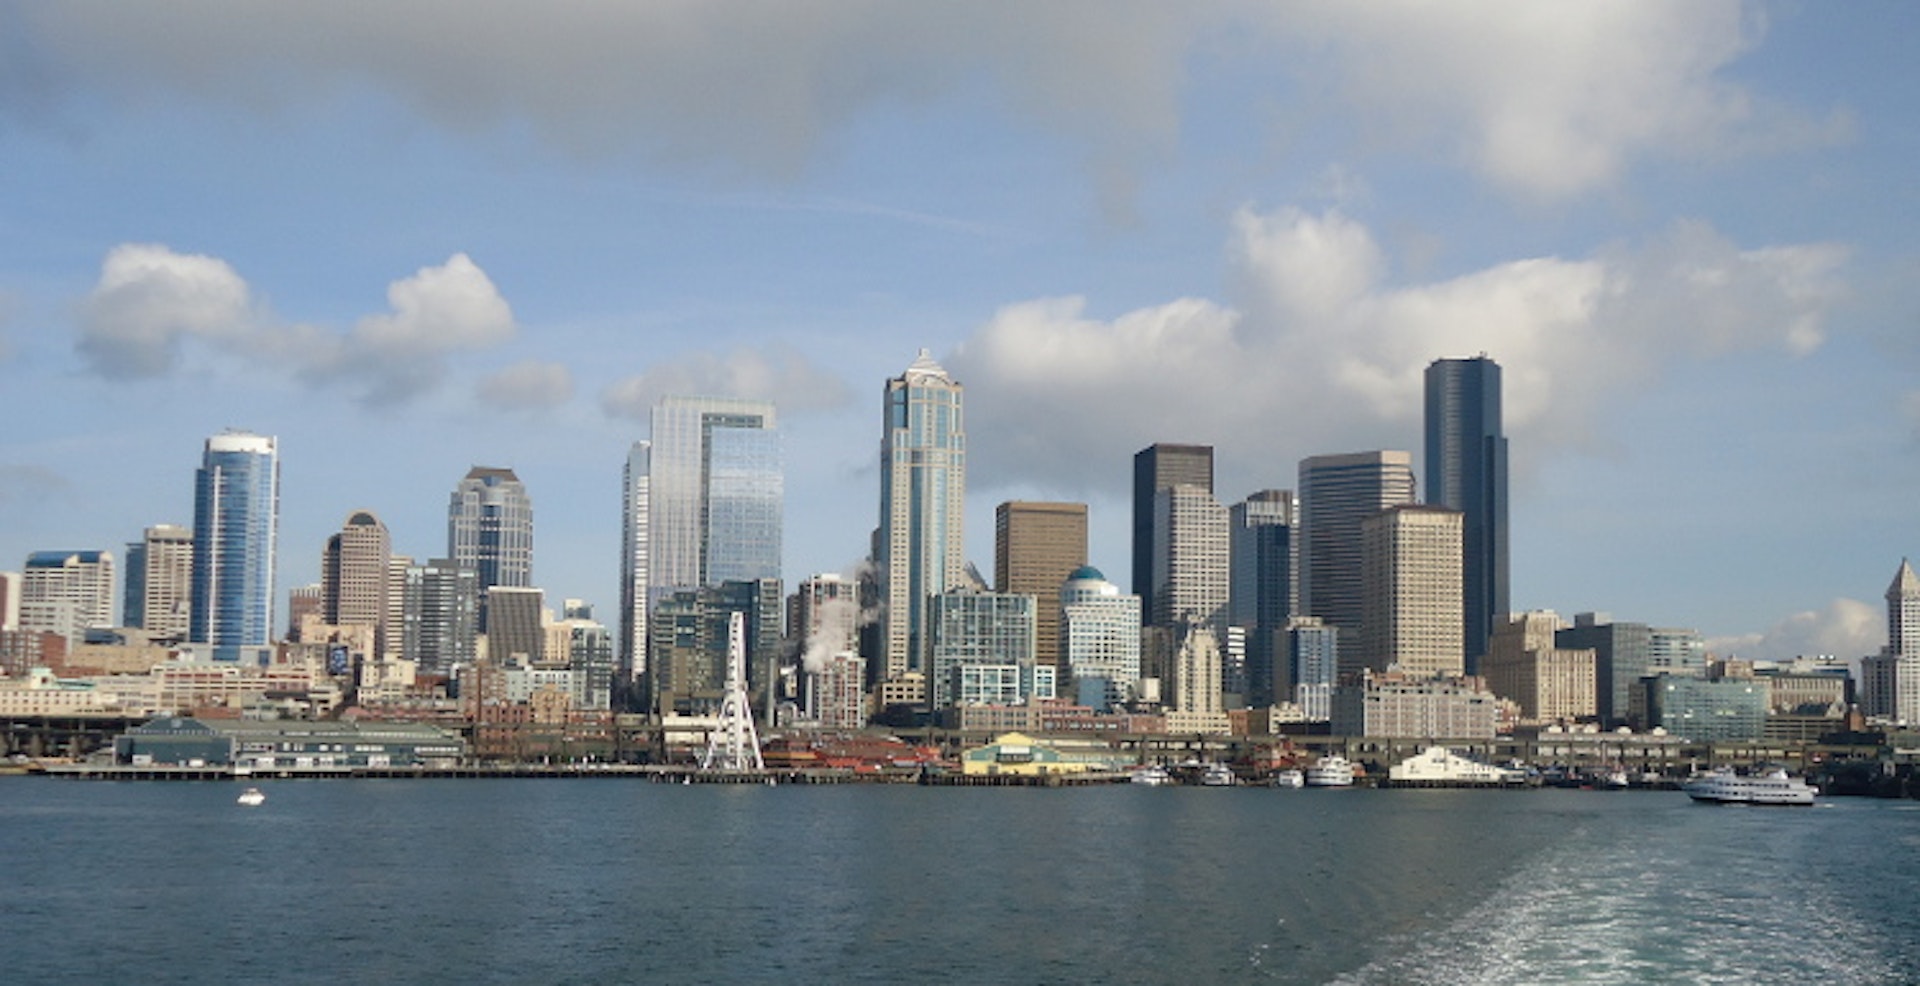 The Seattle skyline as seen from the ferry. Image by Brendan Sainsbury / Lonely Planet